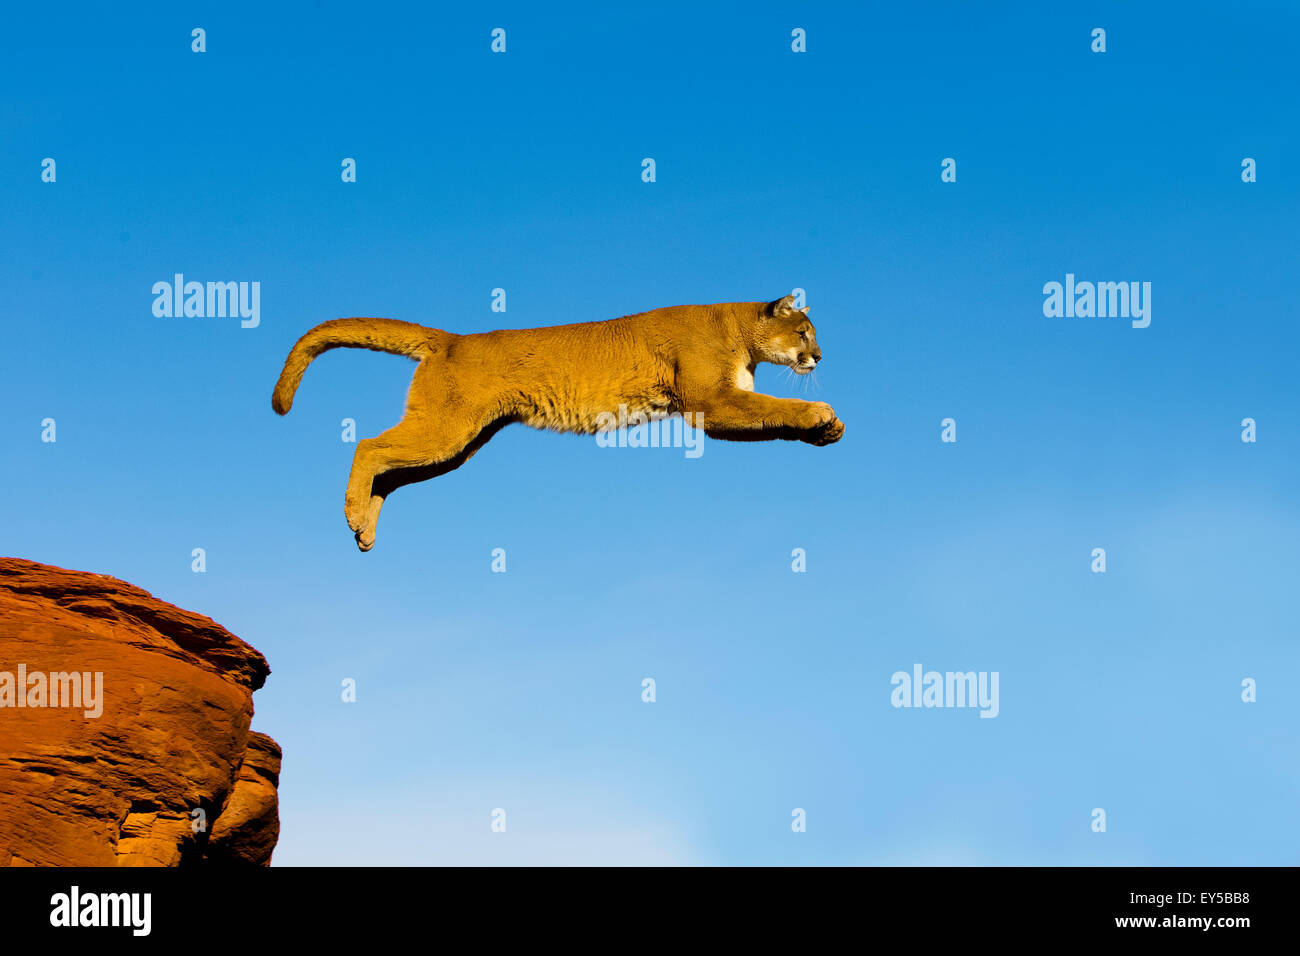 Puma jumping from one rock to another - Utah USA Stock Photo - Alamy